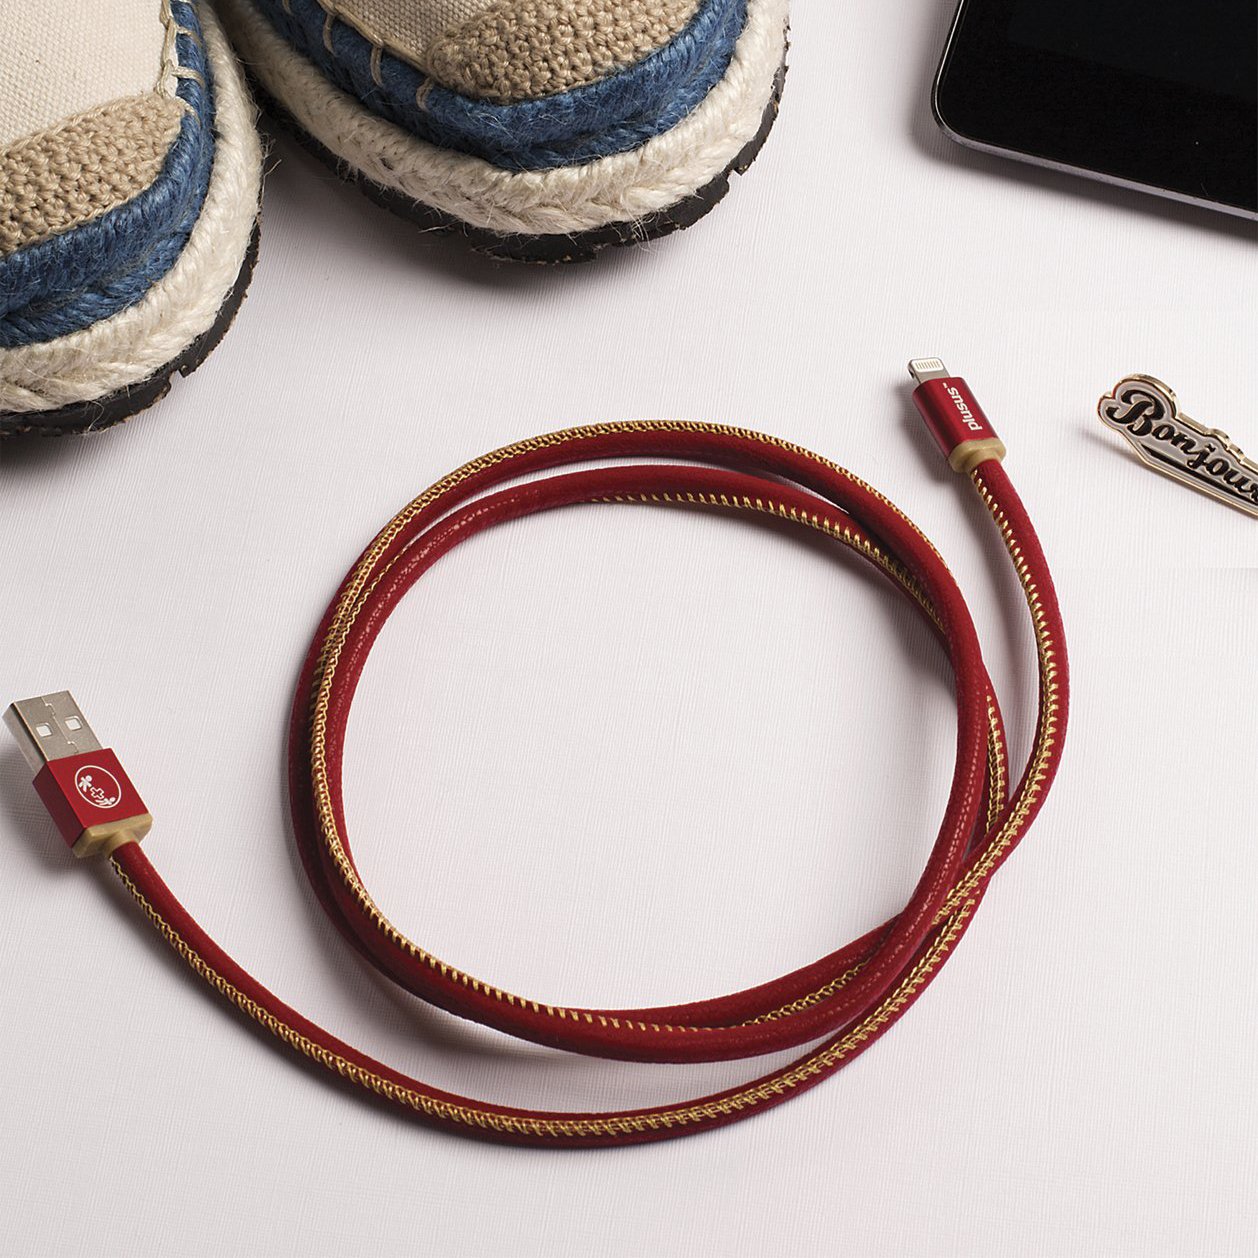 Lifestar Handcrafted Ruby Sunset 0.25m Micro USB Cable